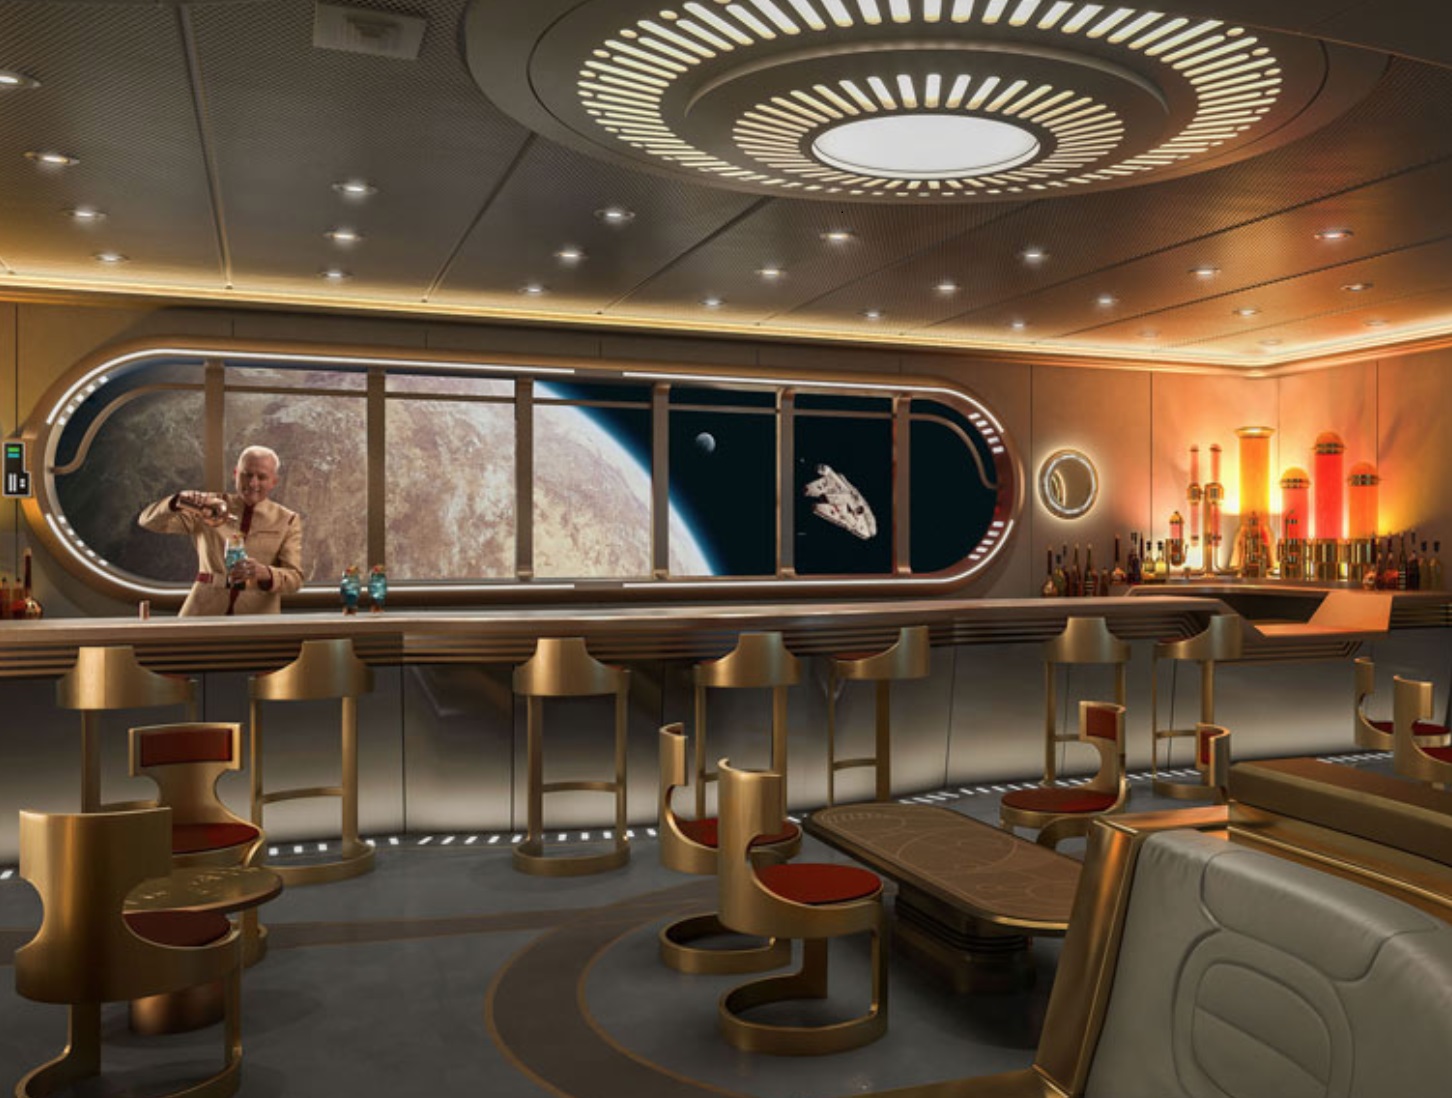 Here's a first look at Disney Cruise Line's 'Star Wars